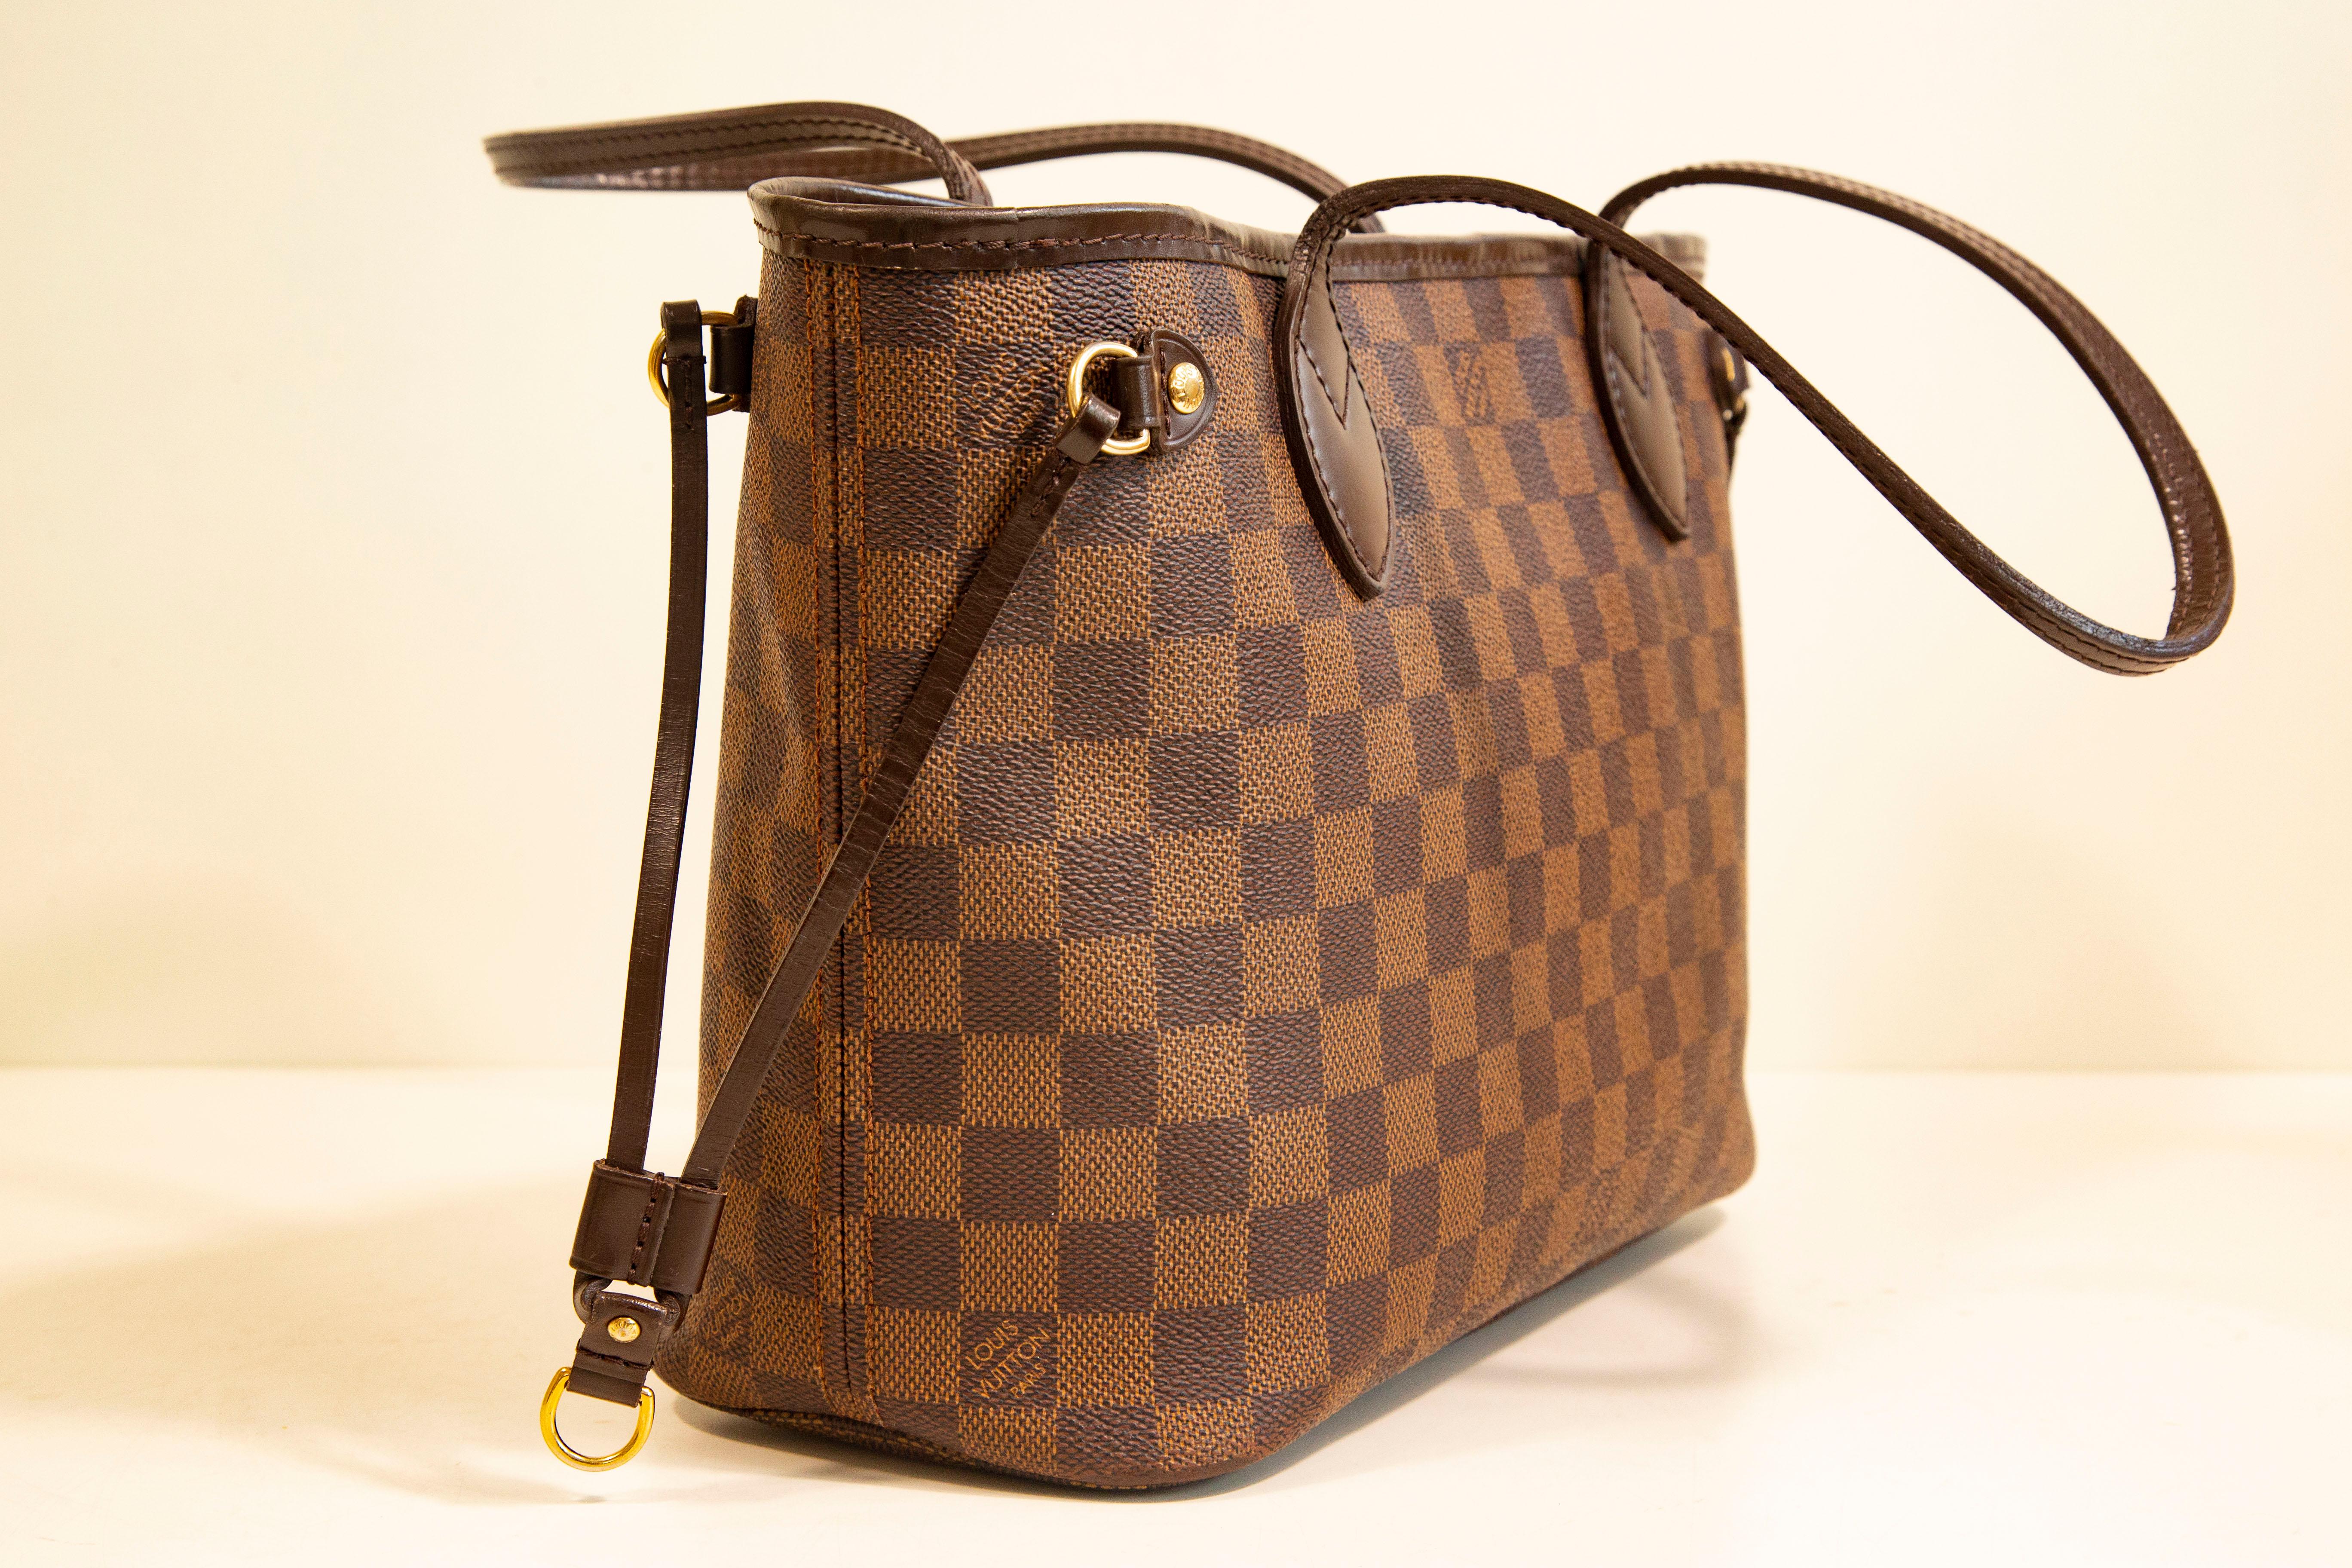 Louis Vuitton Neverfull PM Tote Shoulder Bag in Damier Ebene For Sale 5